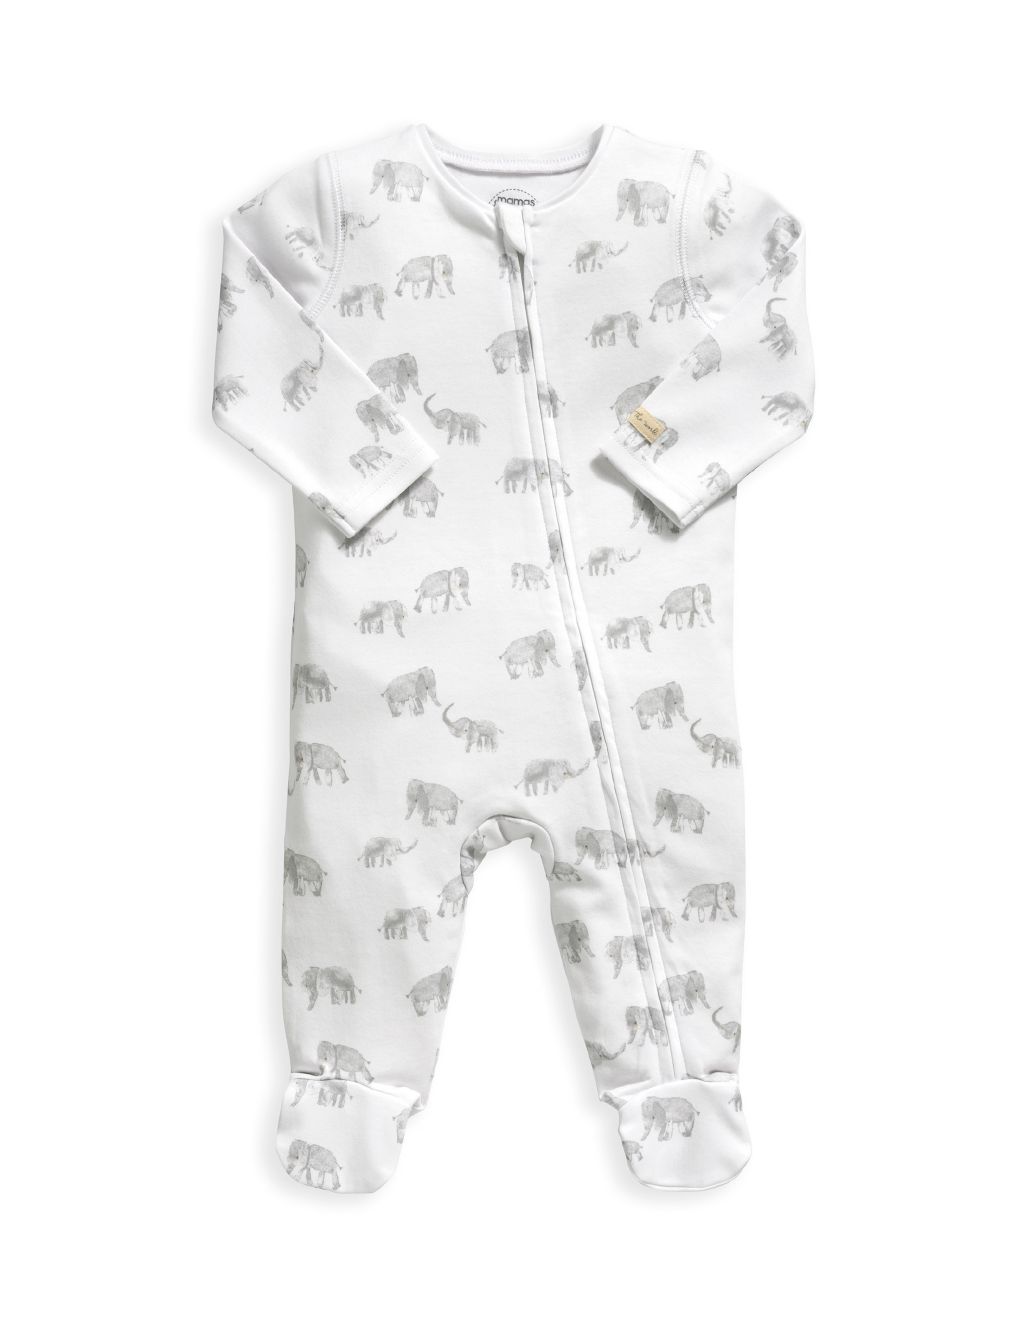 Elephant Print All In One (6½lbs-12 Mths) image 1